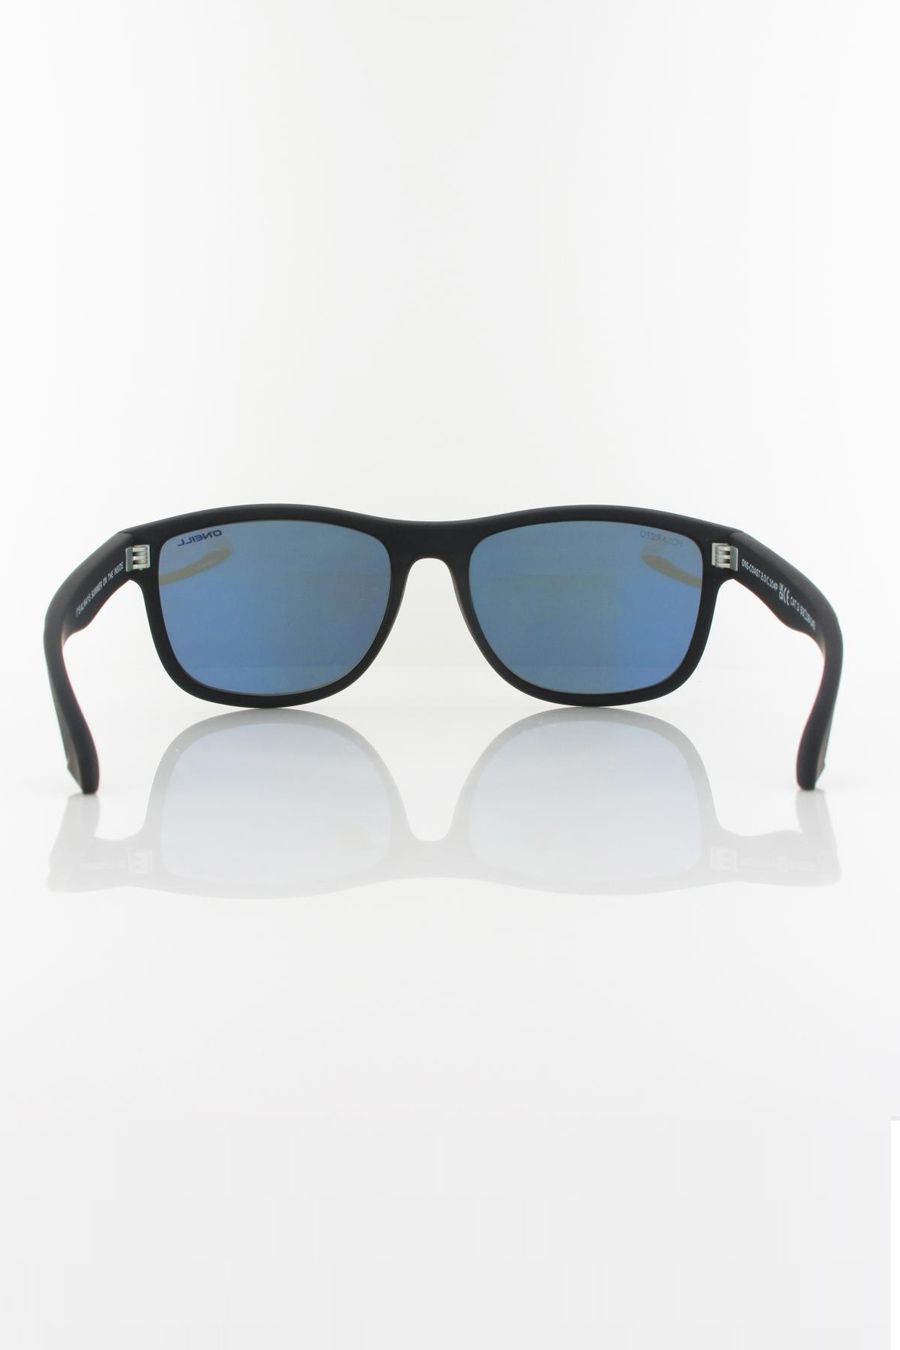 Saulesbrilles ONEILL ONS-COAST20-104P